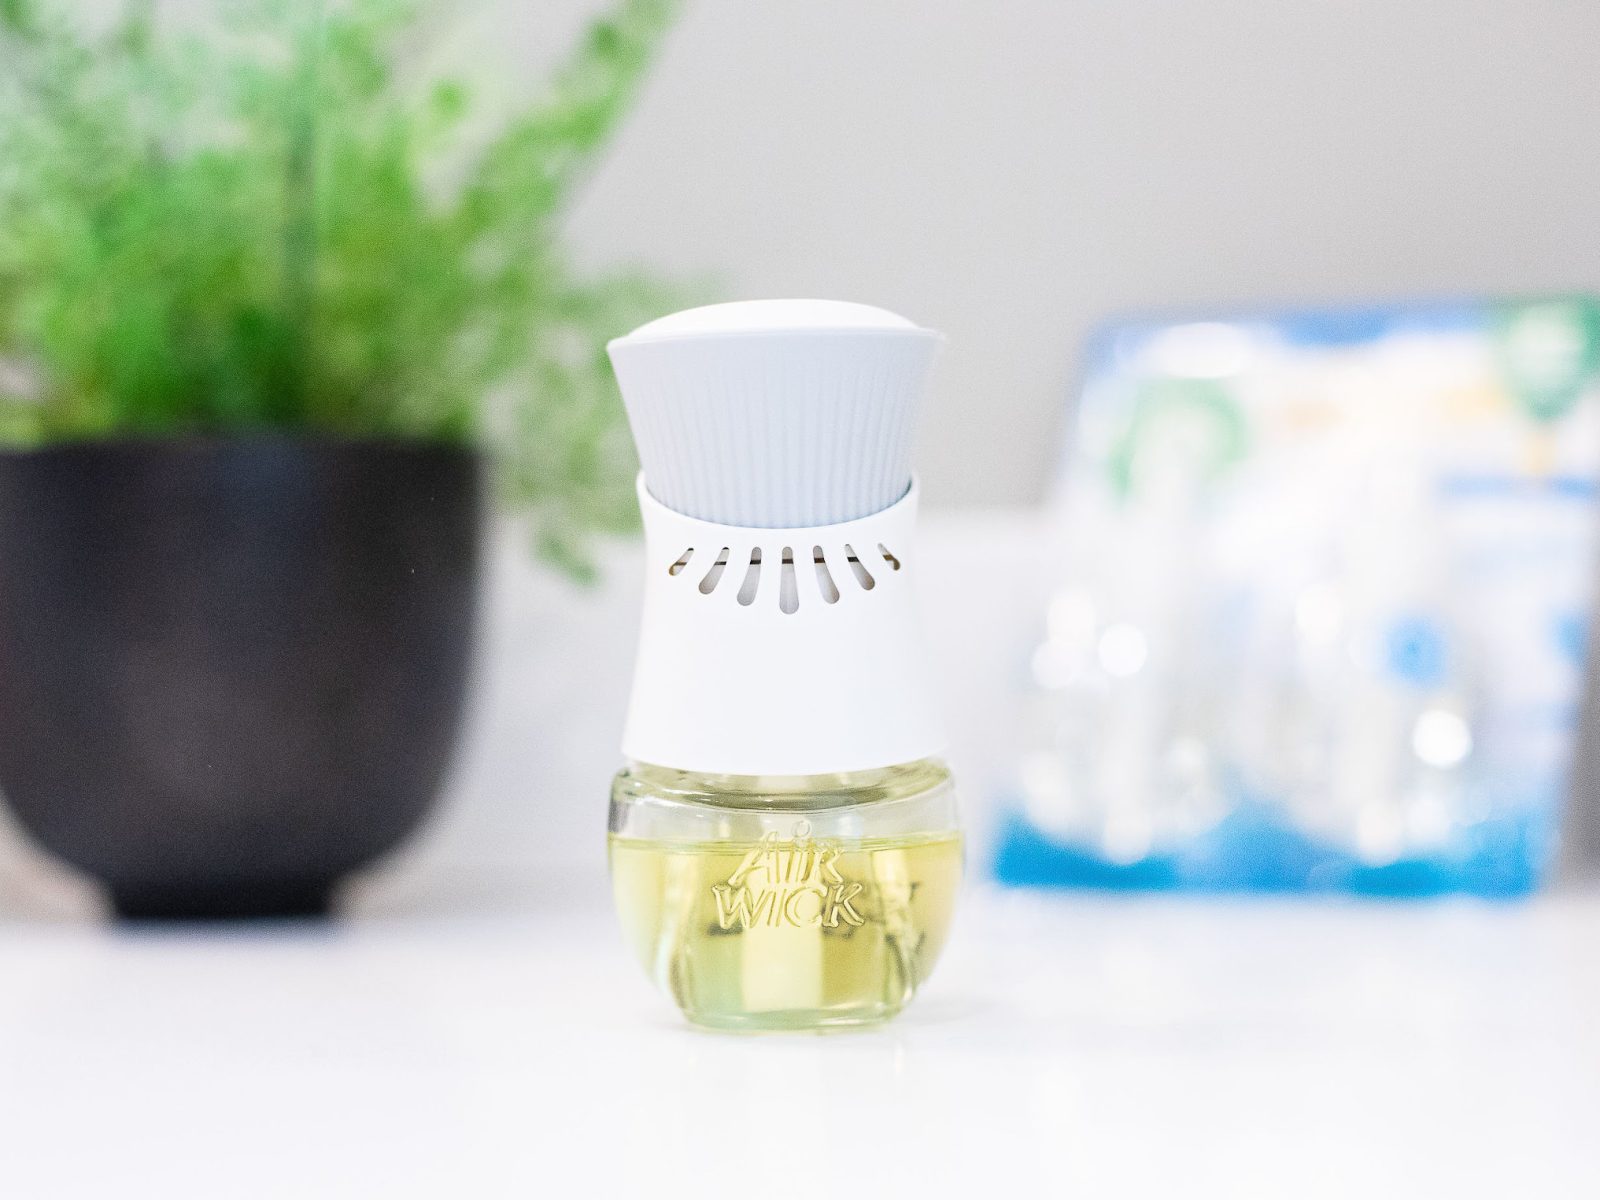 FREE Air Wick Scented Oil Warmers At Publix